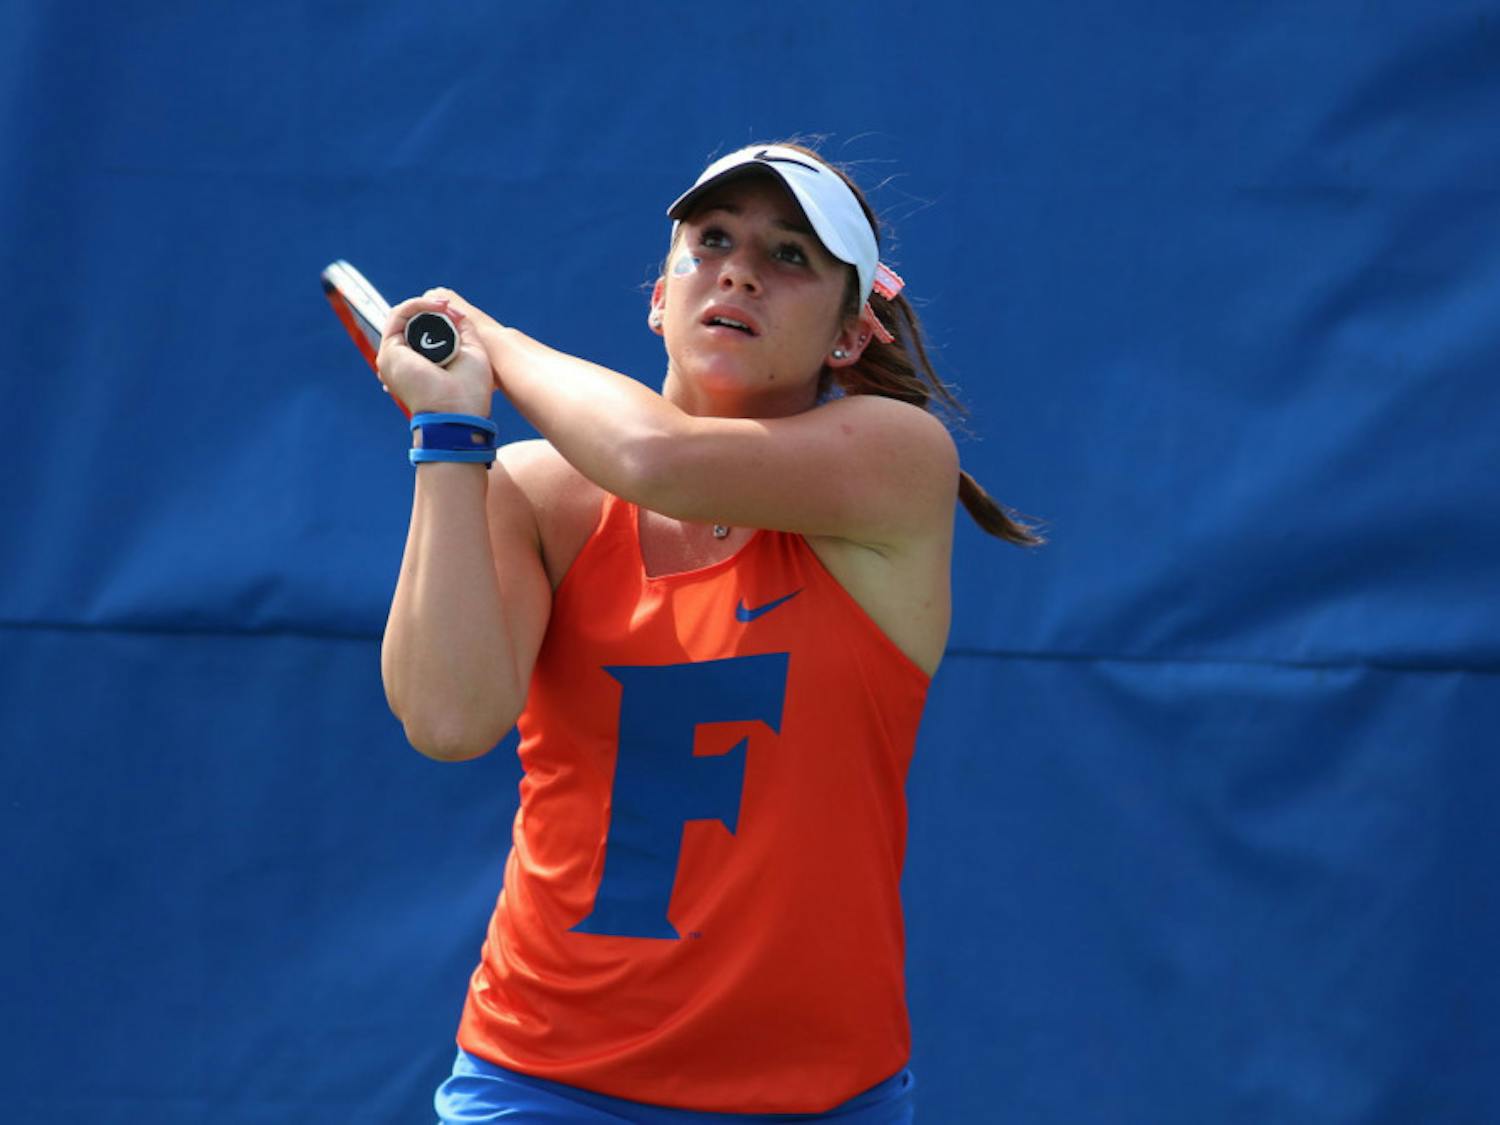 The sophomore tandem of Victoria Emma (pictured) and McCartney Kessler defeated No. 65 Mackenzy Middlebrooks and Ellie Wright 6-4 in the Gators win on Sunday.